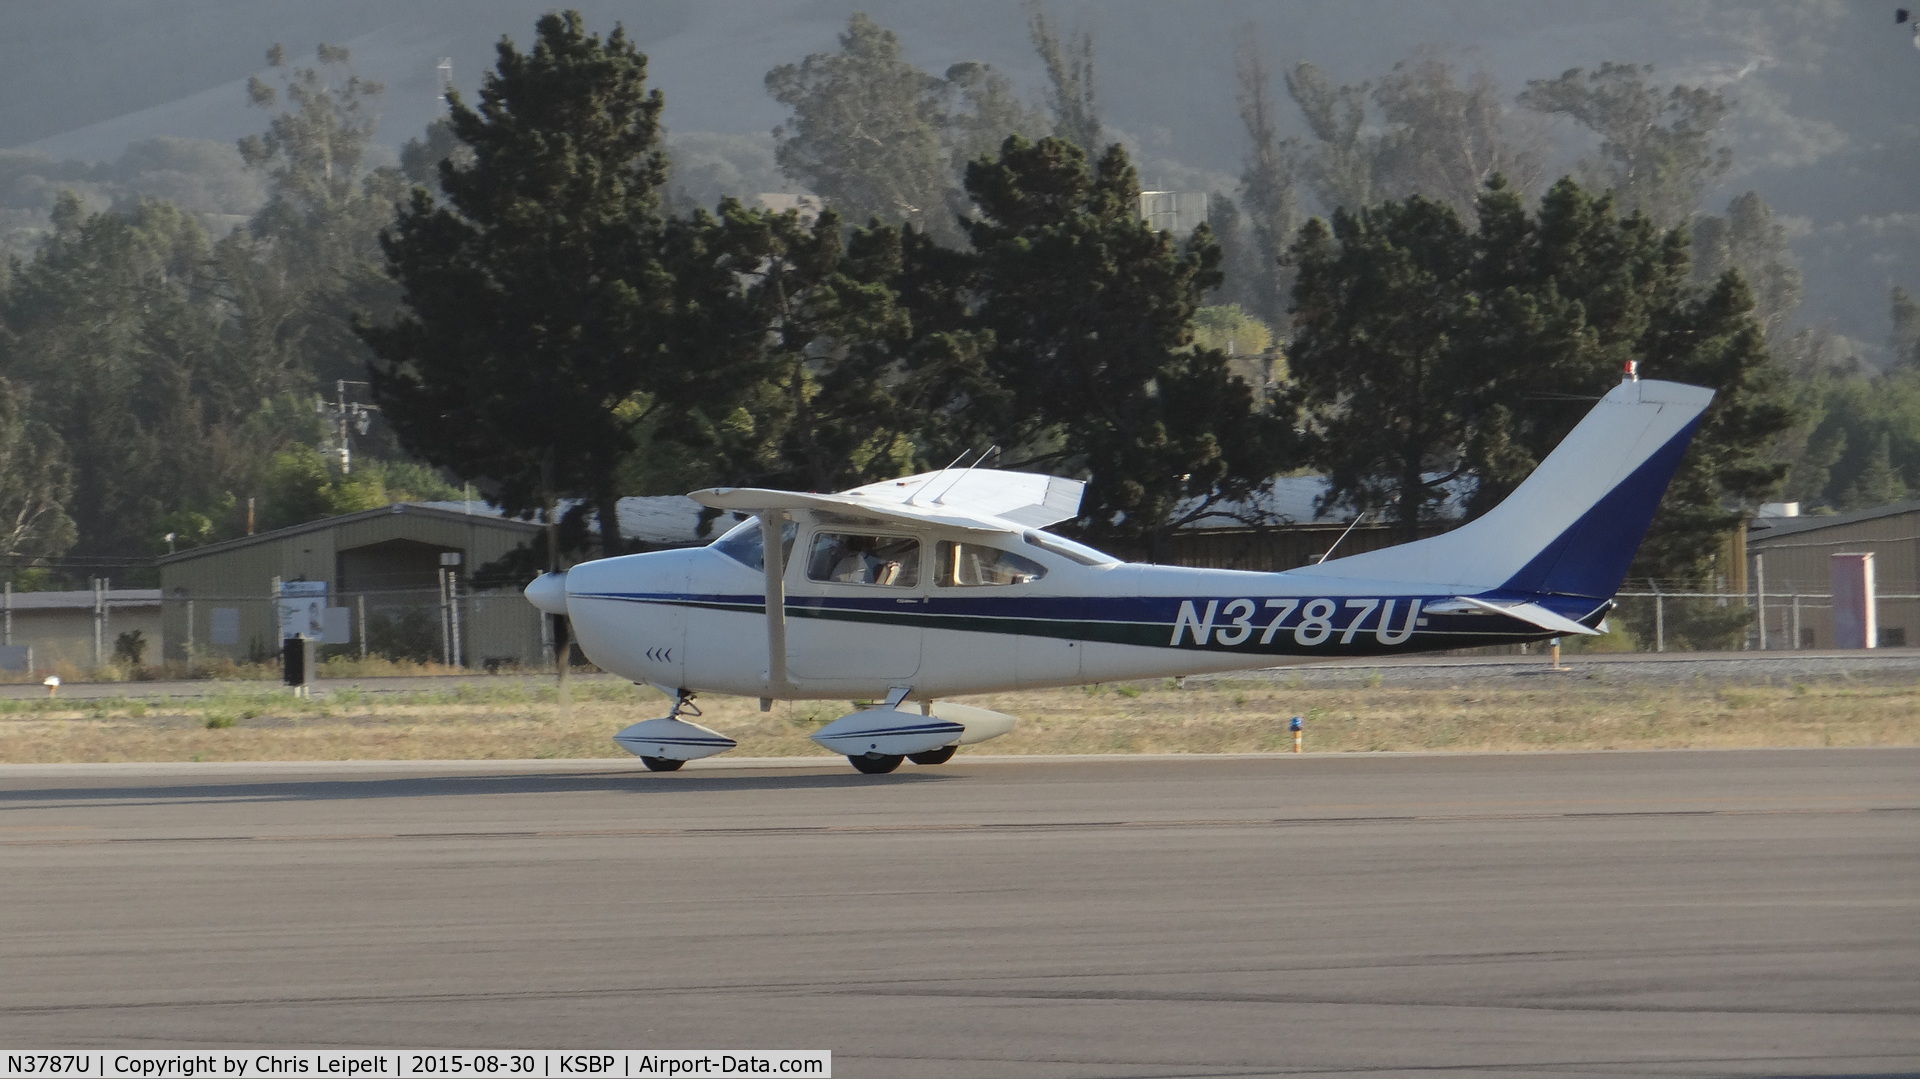 N3787U, 1963 Cessna 182G Skylane C/N 18255187, Locally-based 1963 Cessna 182G taxing out for departure at San Luis Obispo Airport, San Luis Obispo, CA.